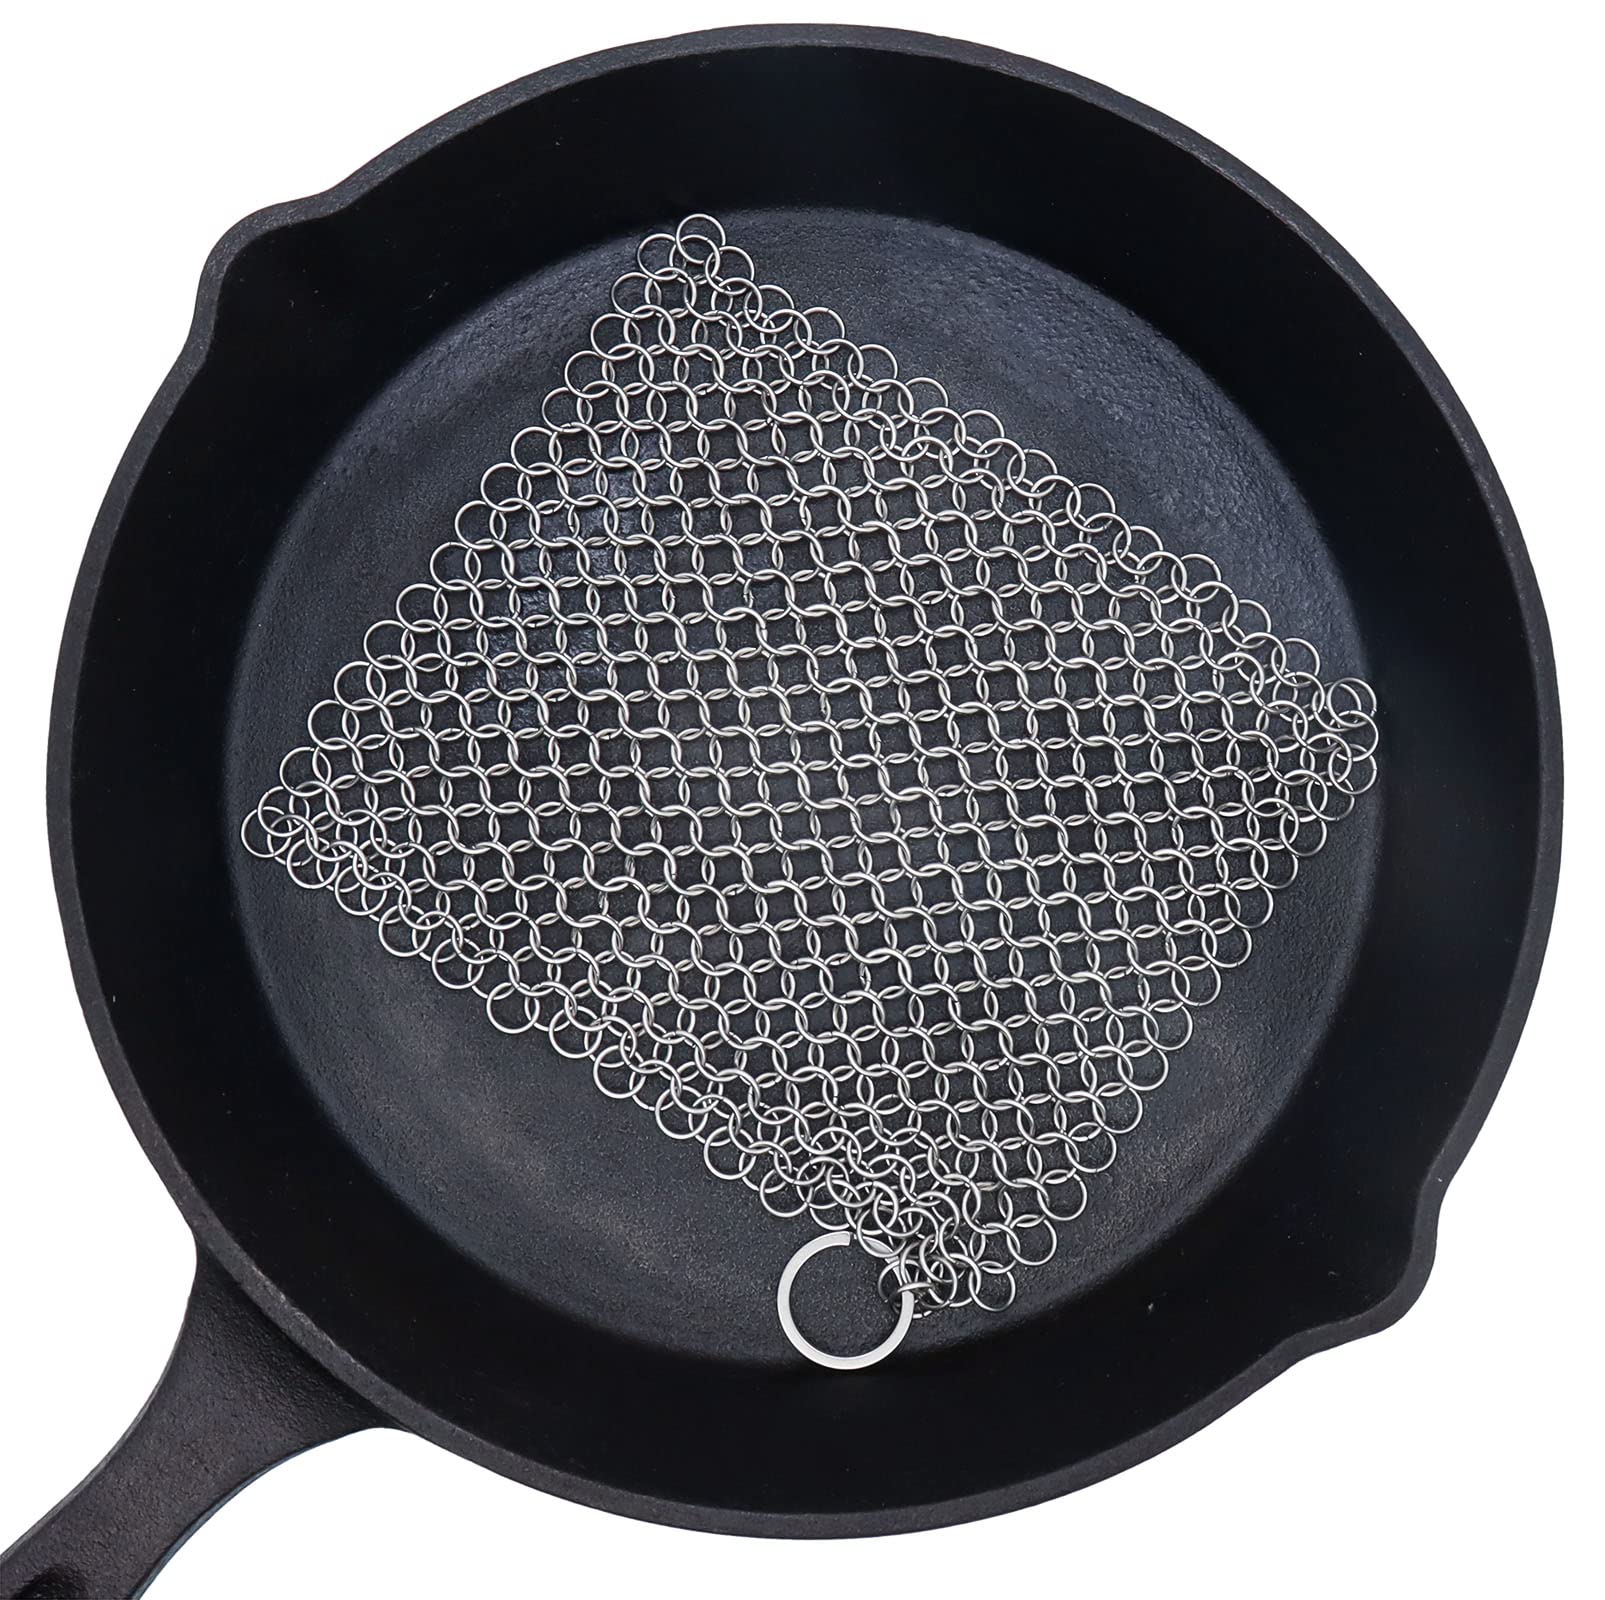 Cast Iron Skillet Cleaner Chainmail Scrubber Brush Chain Cleaning